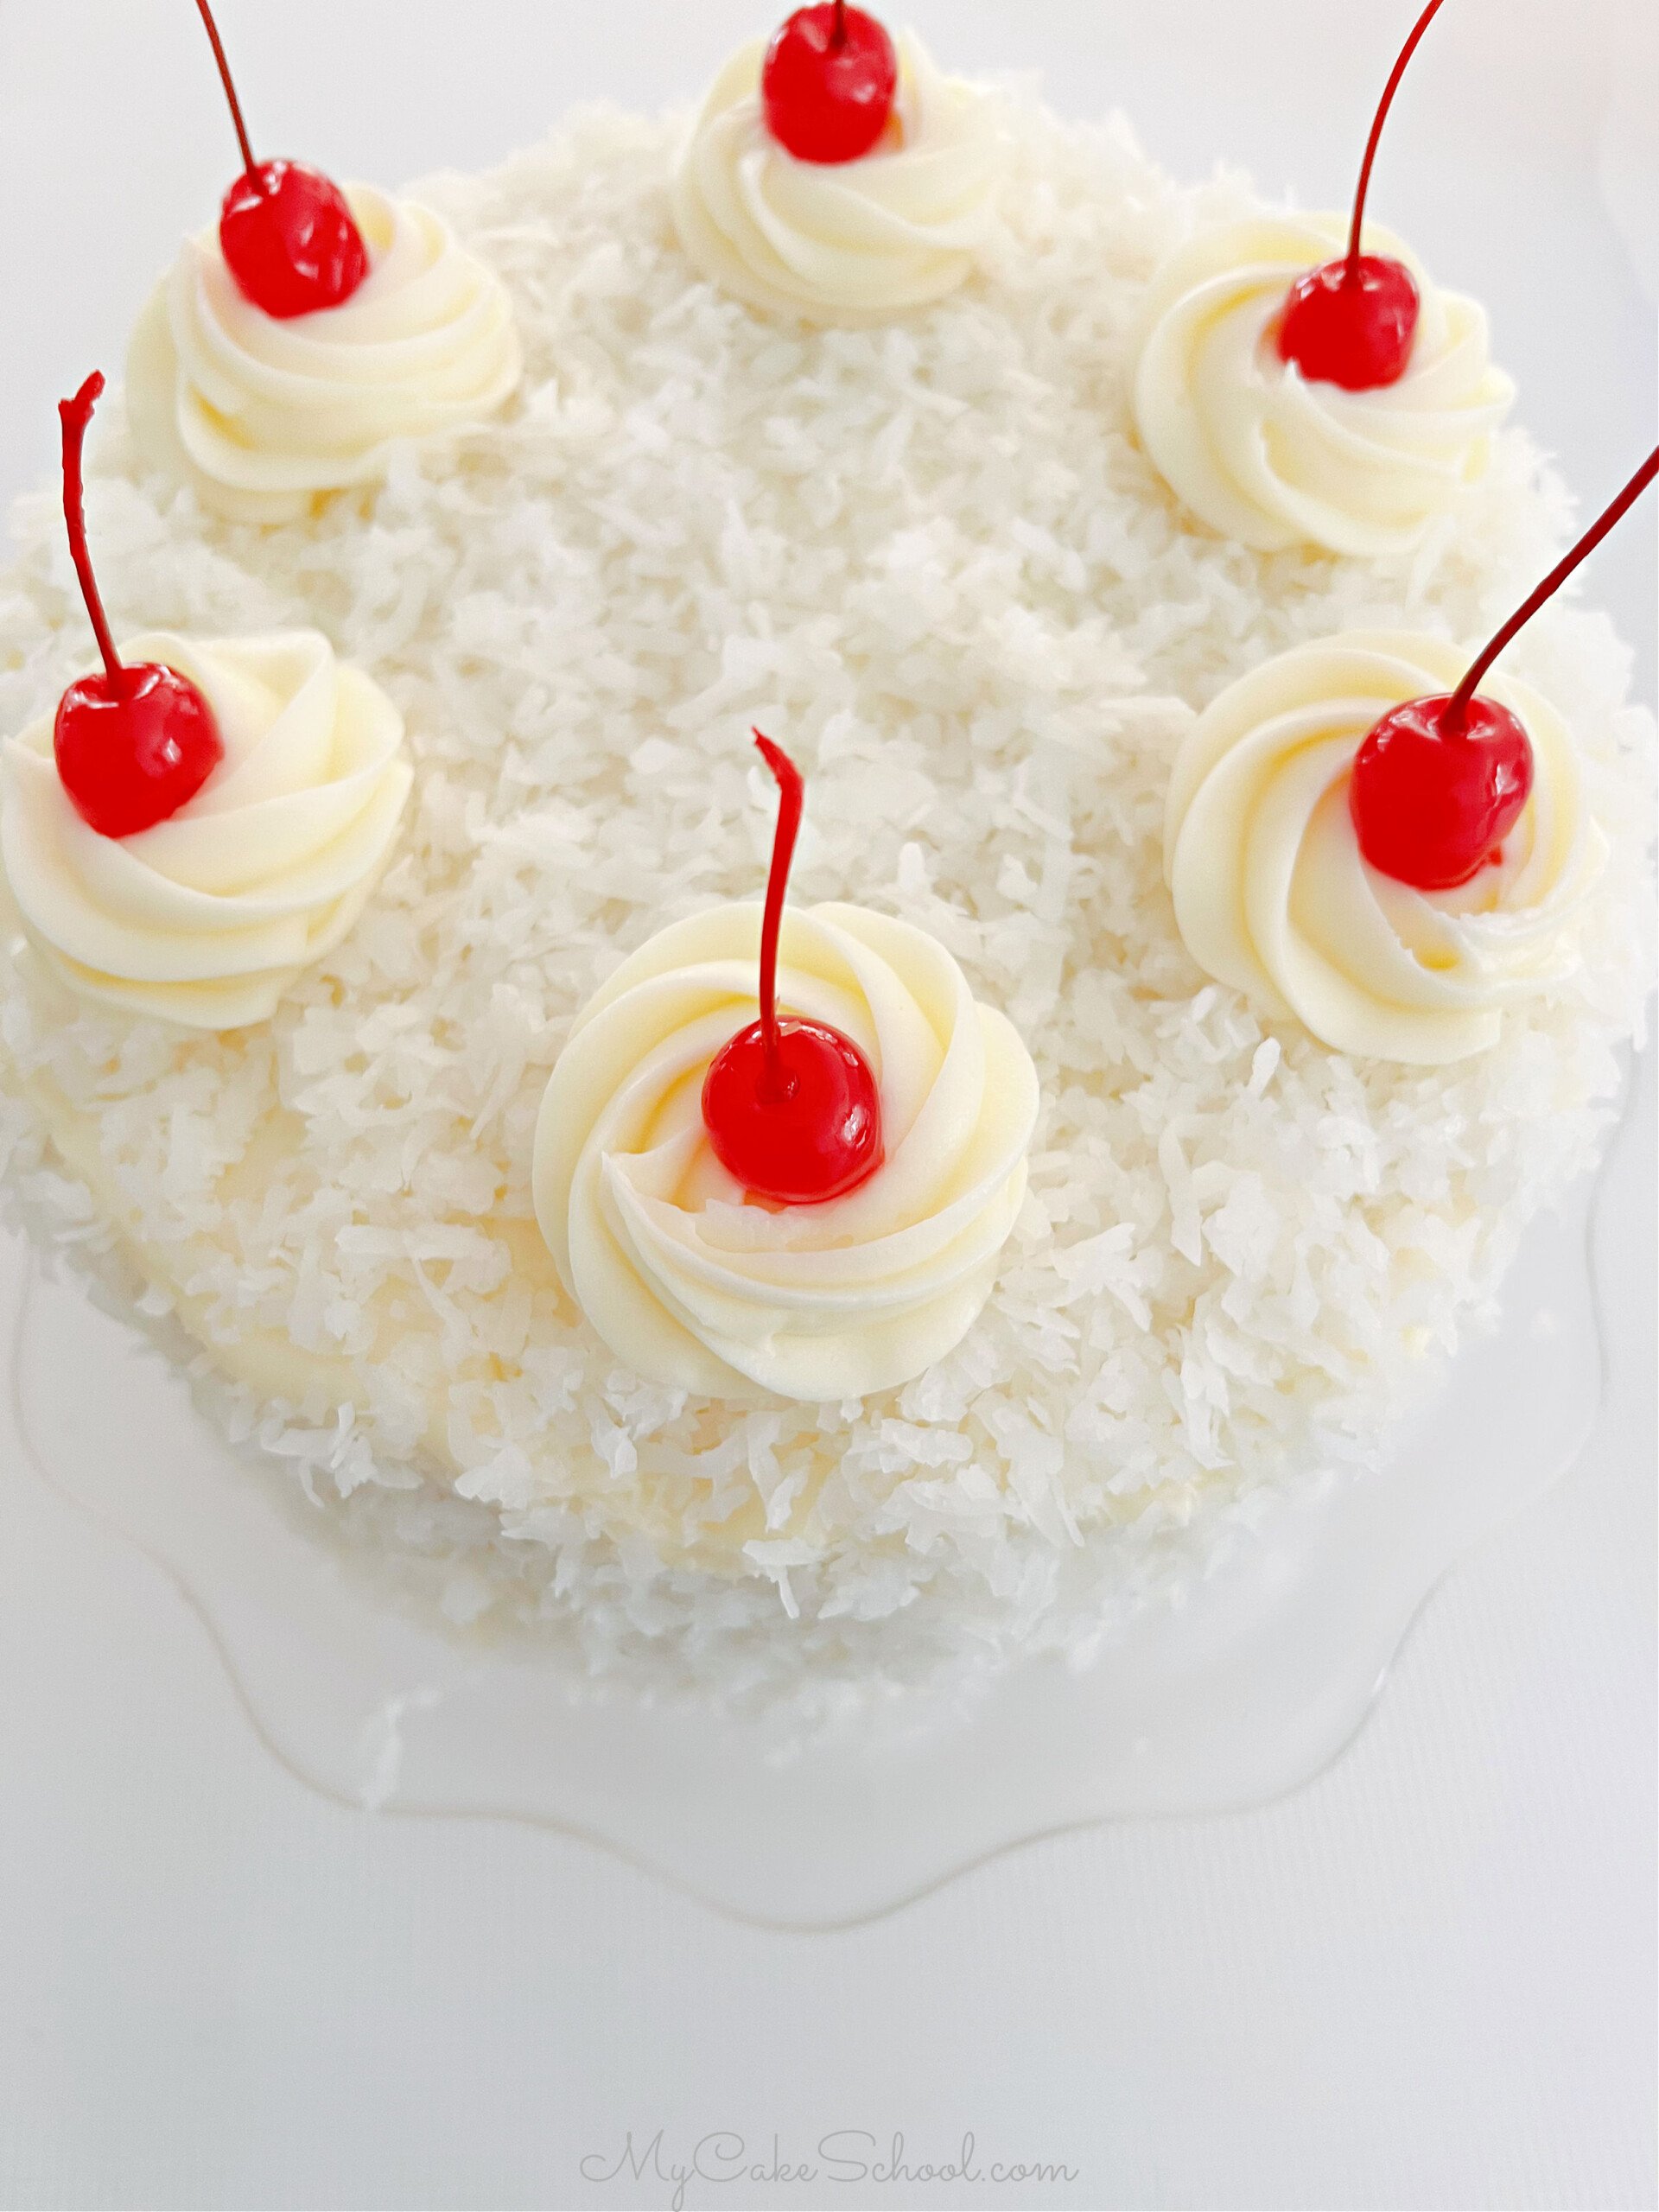 Top view of the Pina Colada Cake, with piped rosettes of cream cheese frosting around the edge, topped with maraschino cherries.